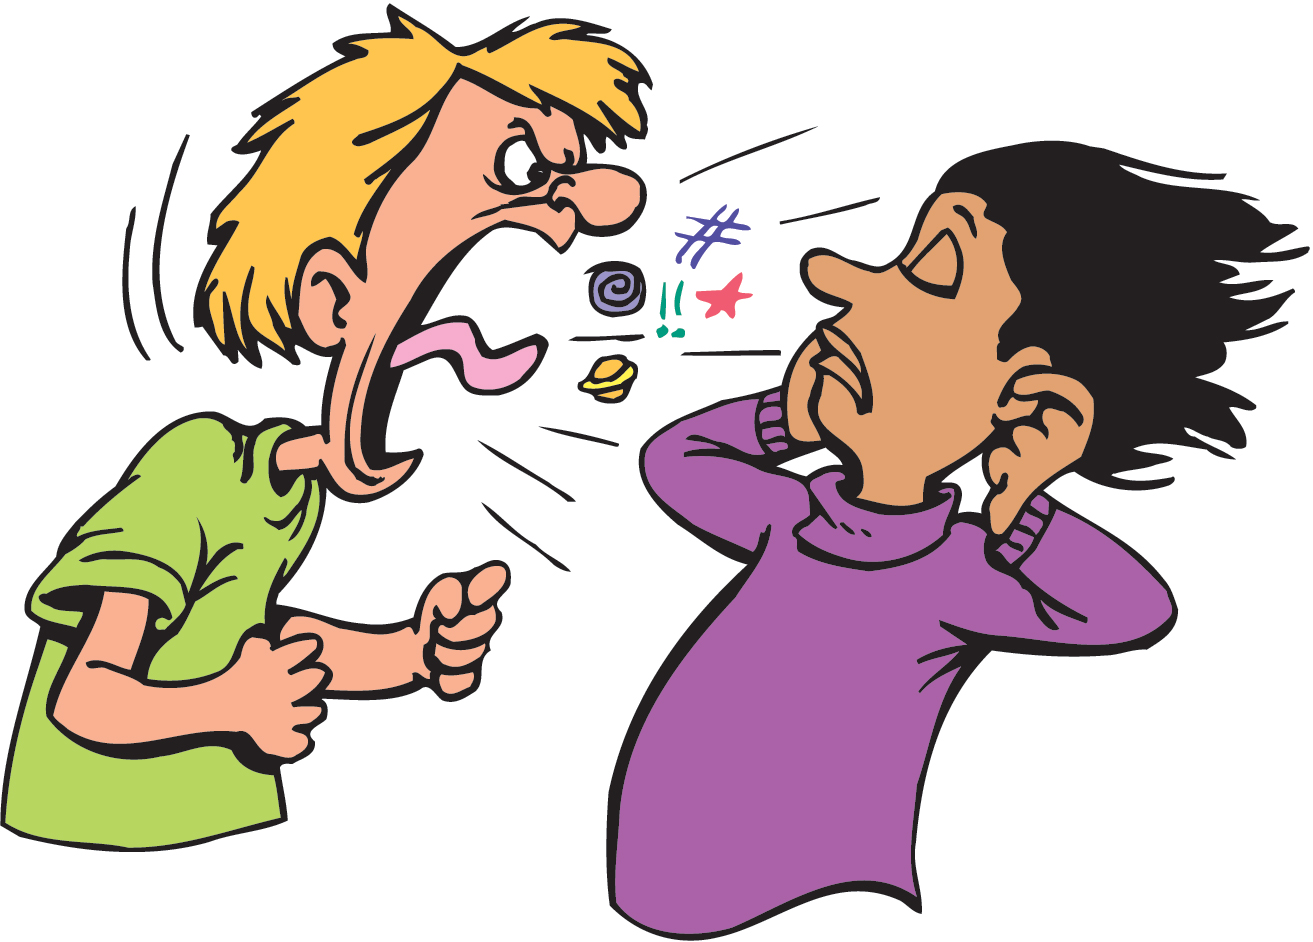 shouting at others - Clip Art Library